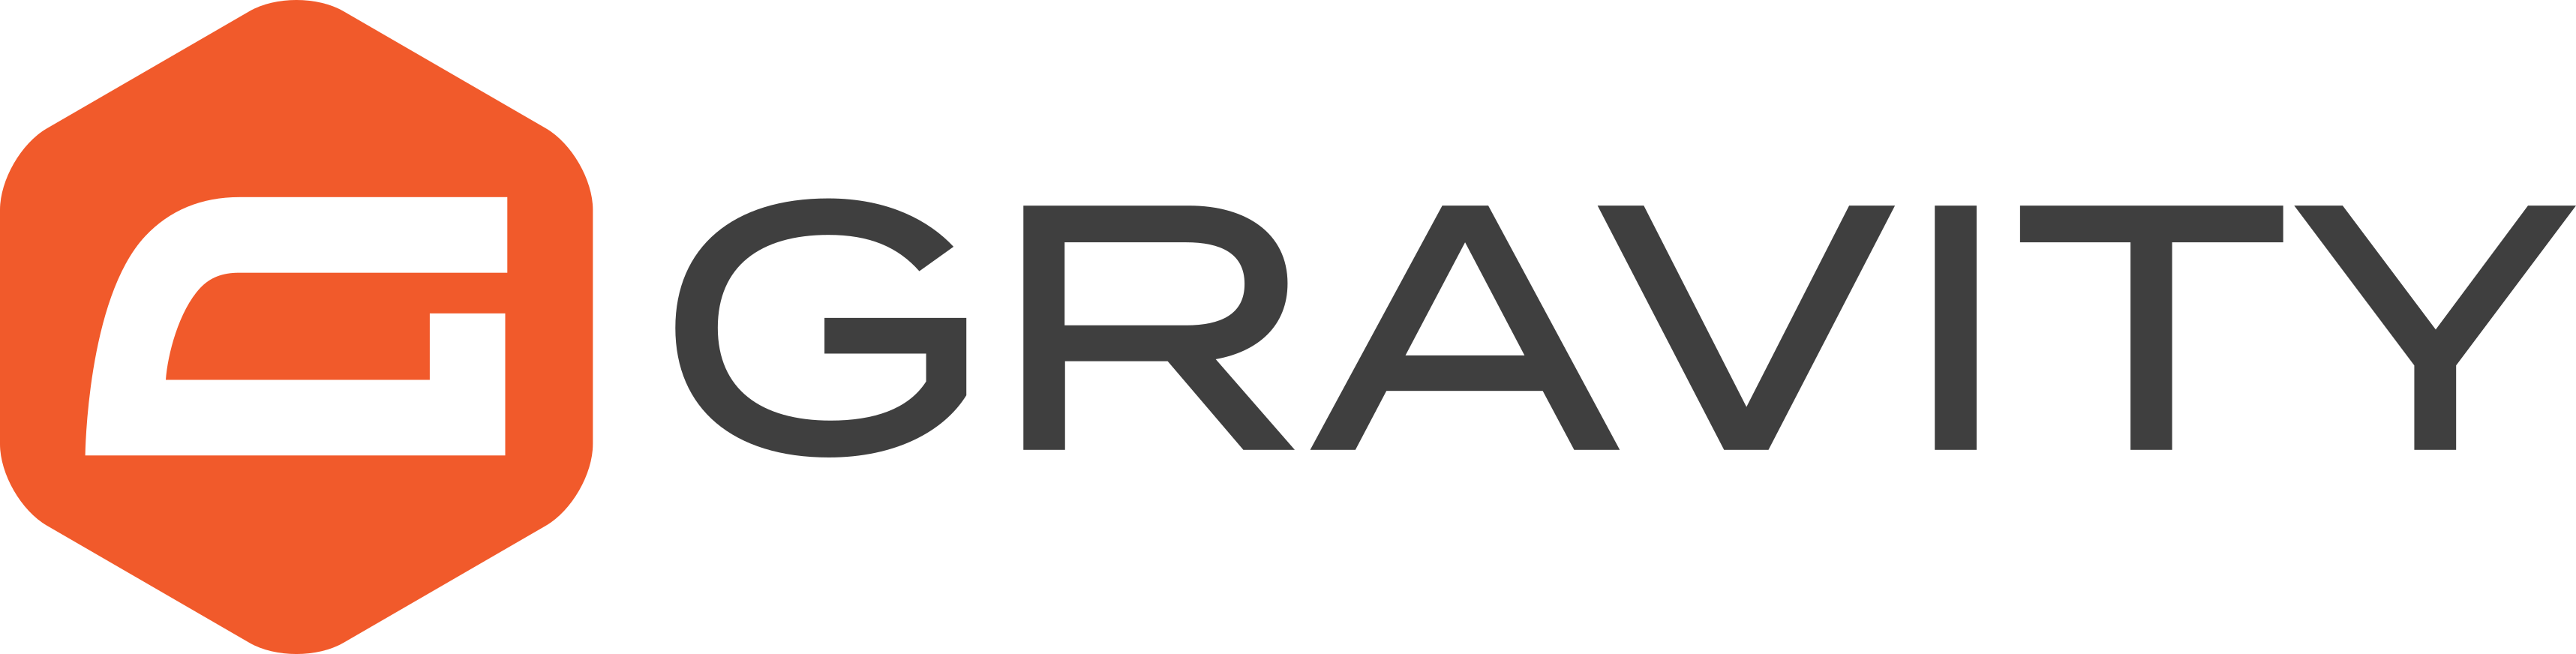 The Gravity Forms logo.